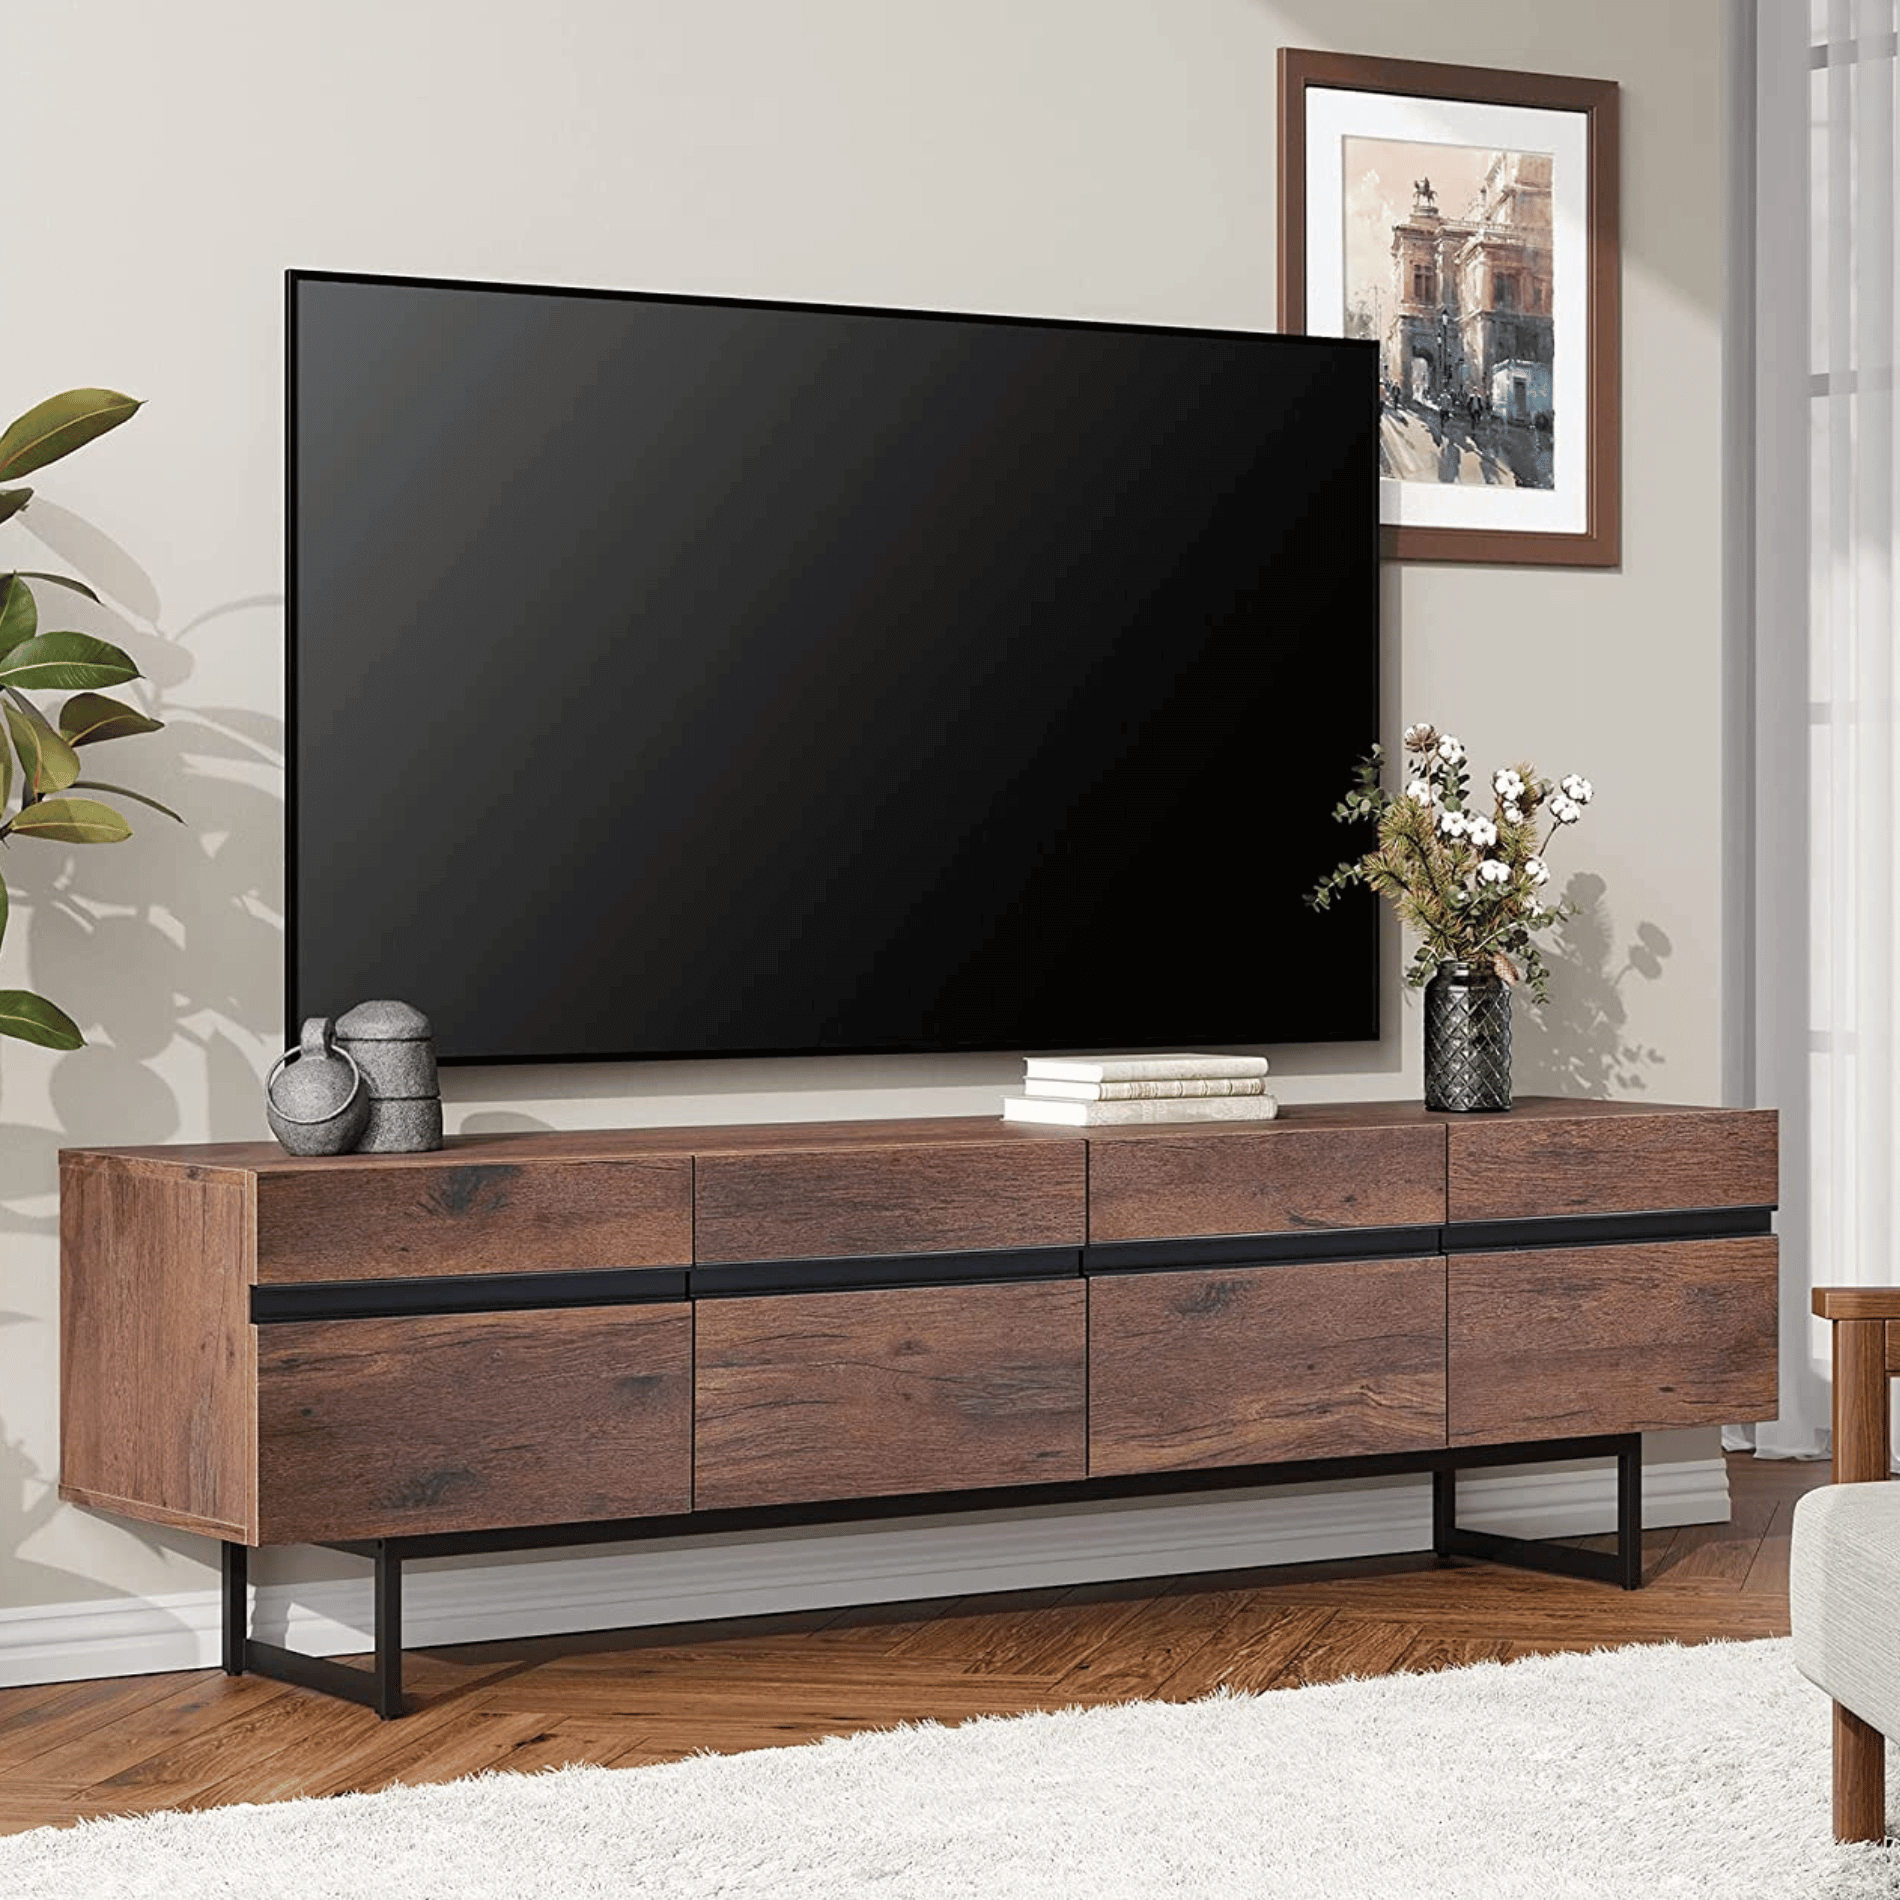 WAMPAT Modern for Center TV Entertainment inch Stand in to 2 100 up 1